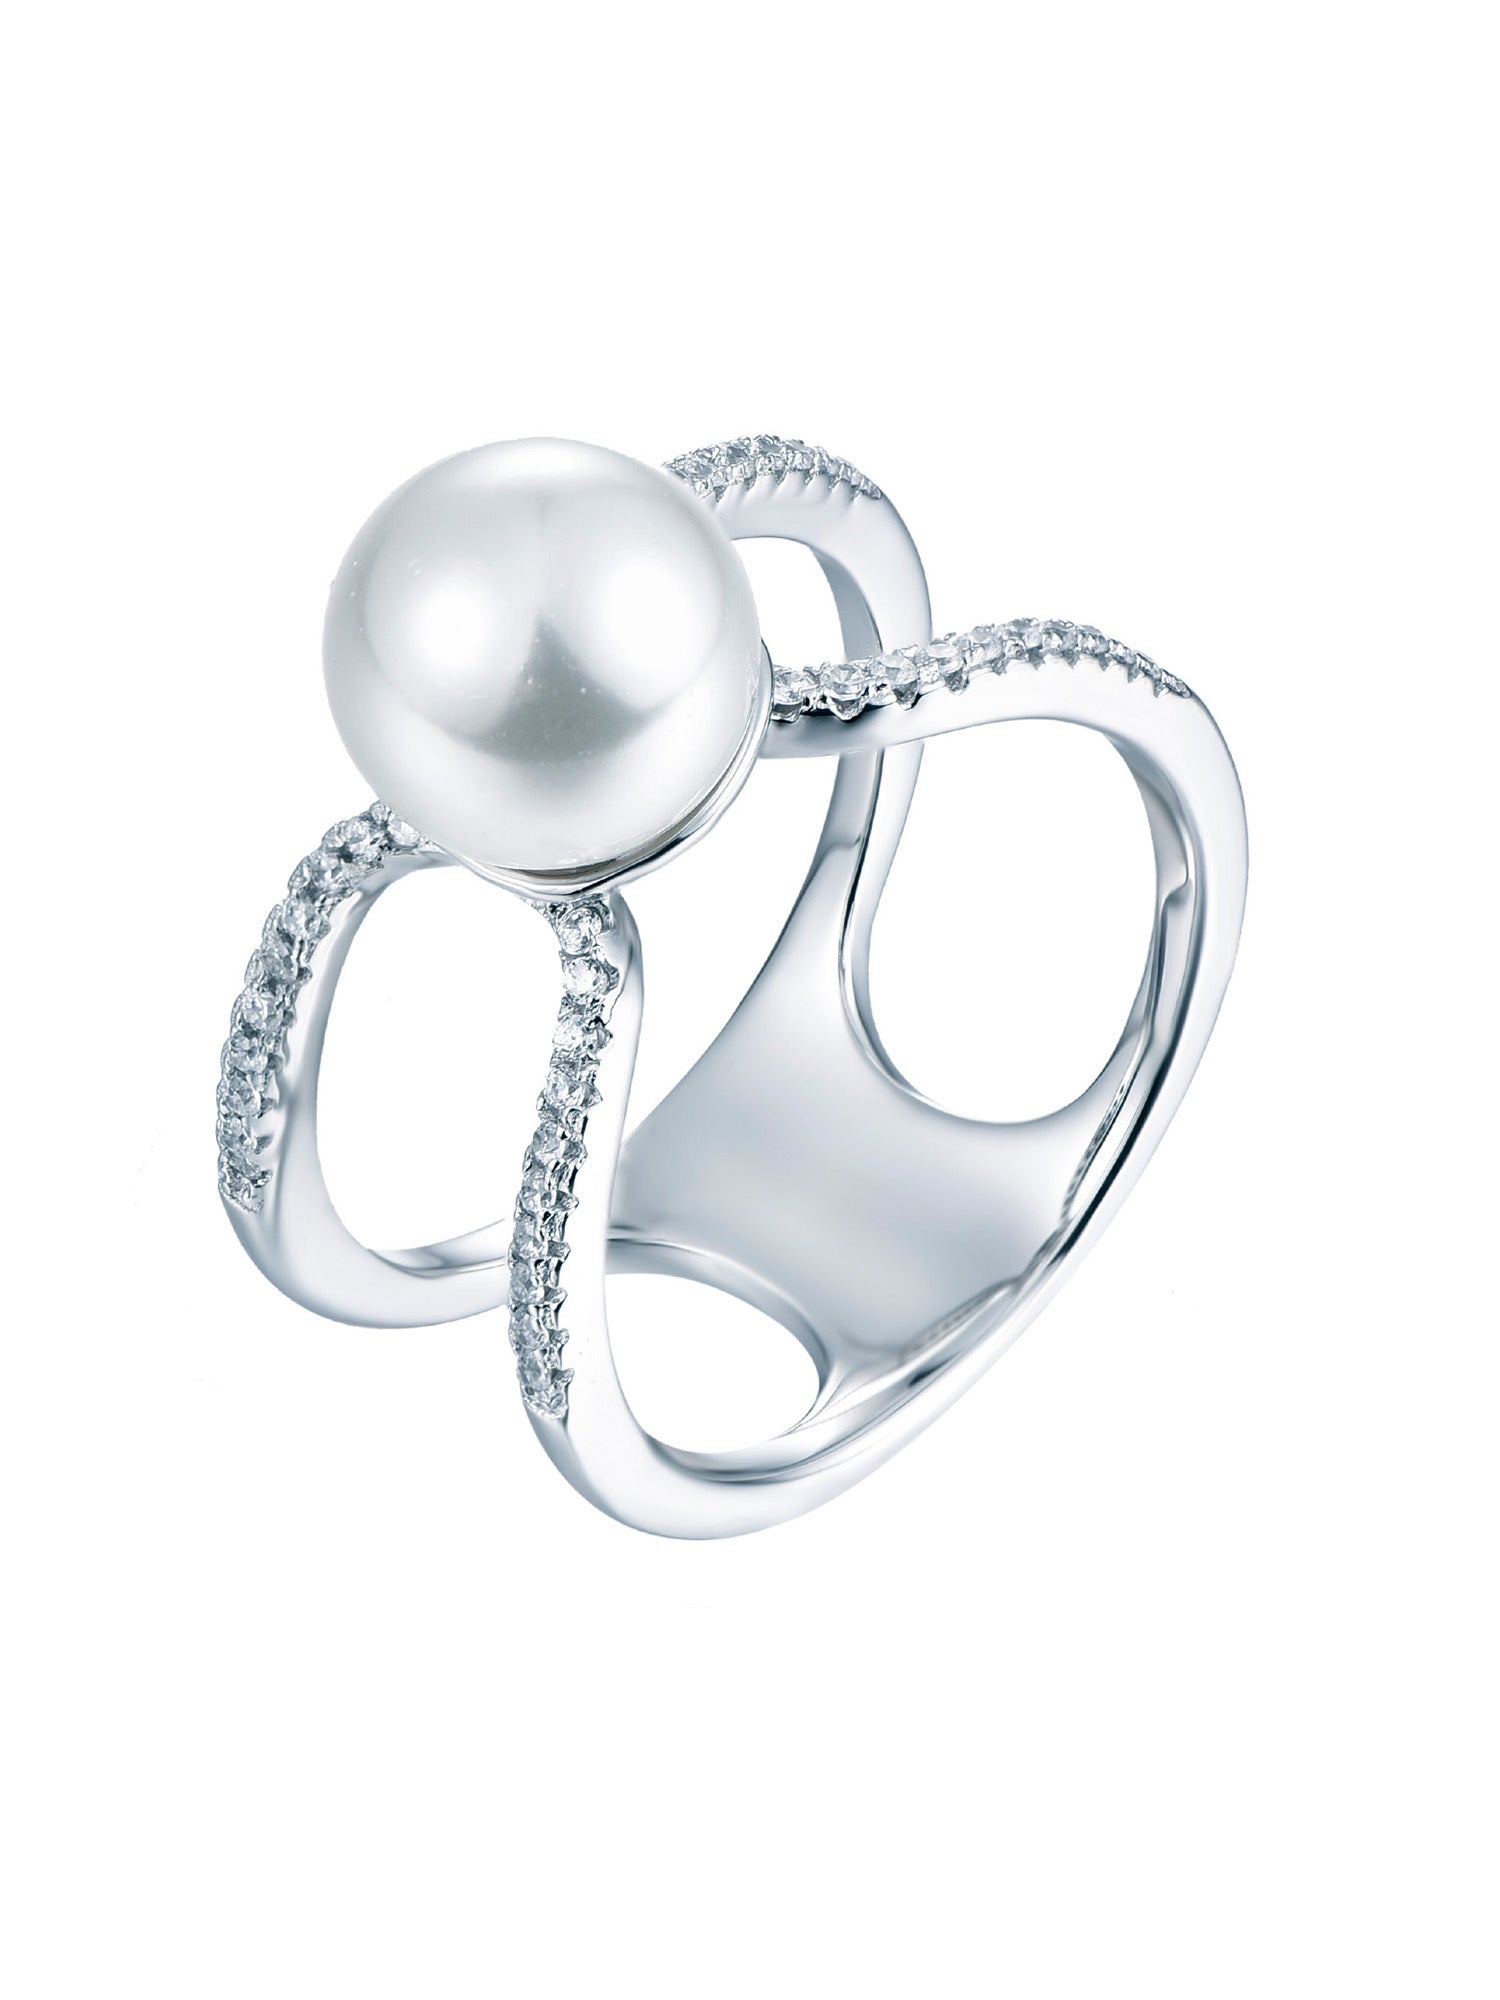 FRESHWATER PURE PEARL 925 SILVER RING